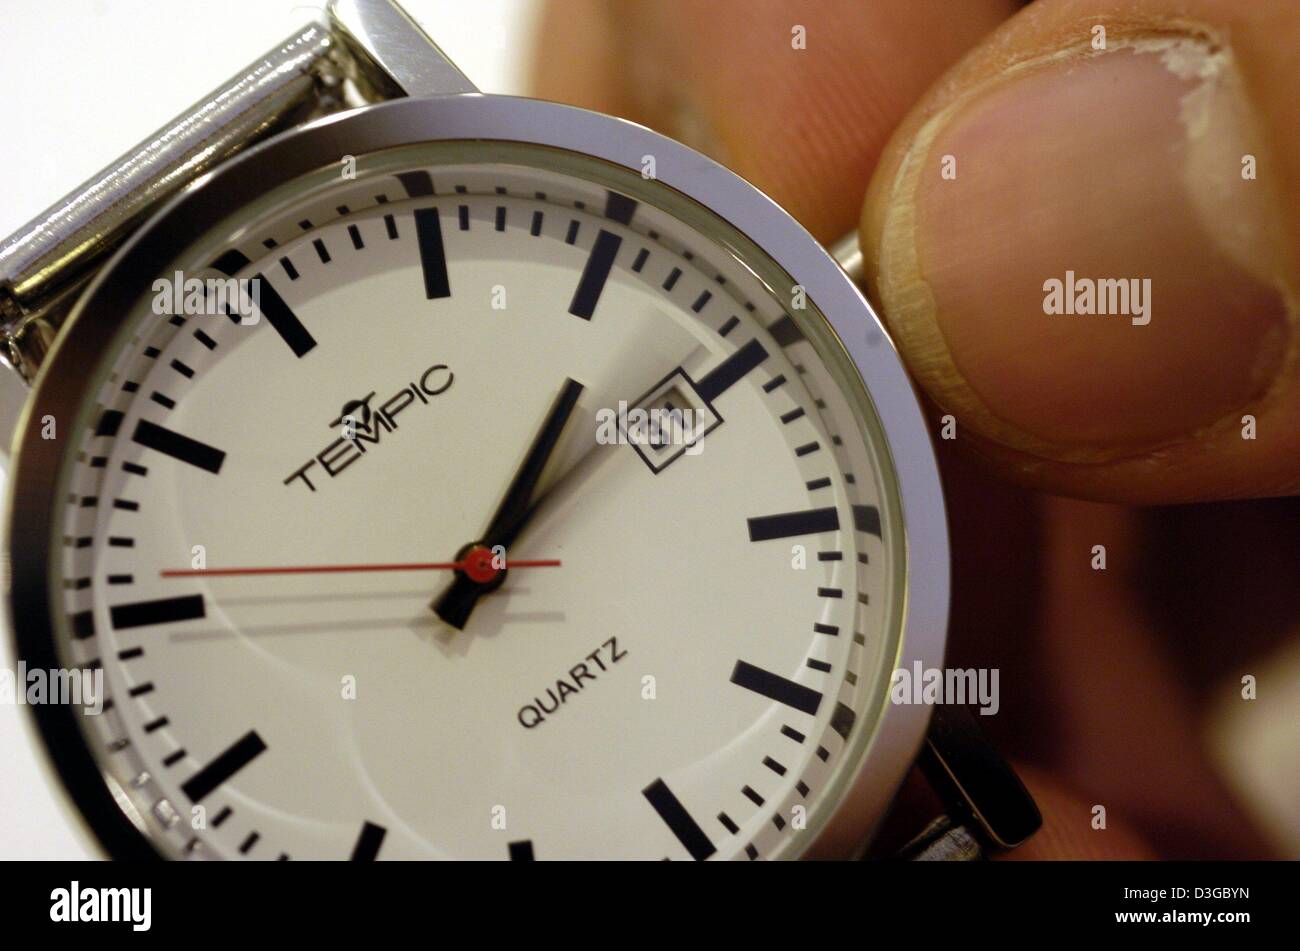 Standard Time High Resolution Stock Photography and Images - Alamy